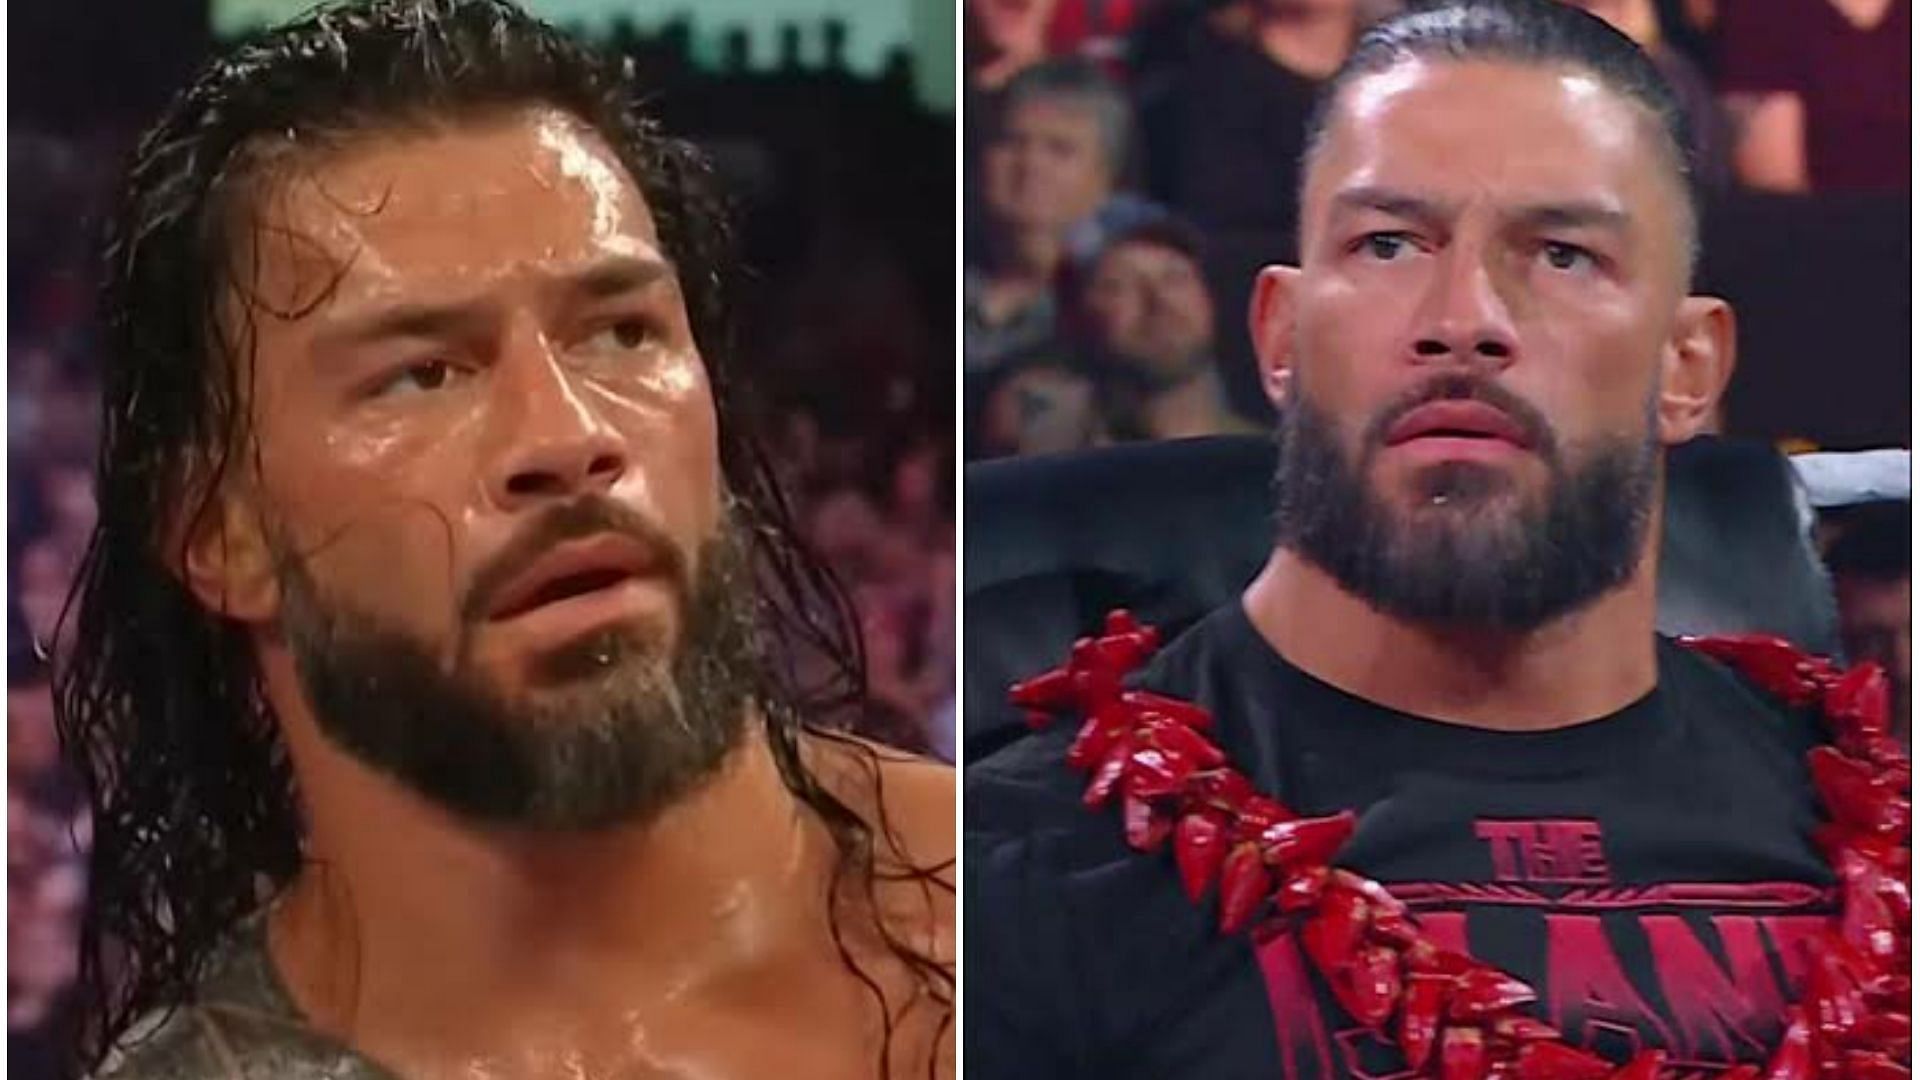 Roman Reigns could be confronted by a ghost from his past at SummerSlam 2023.